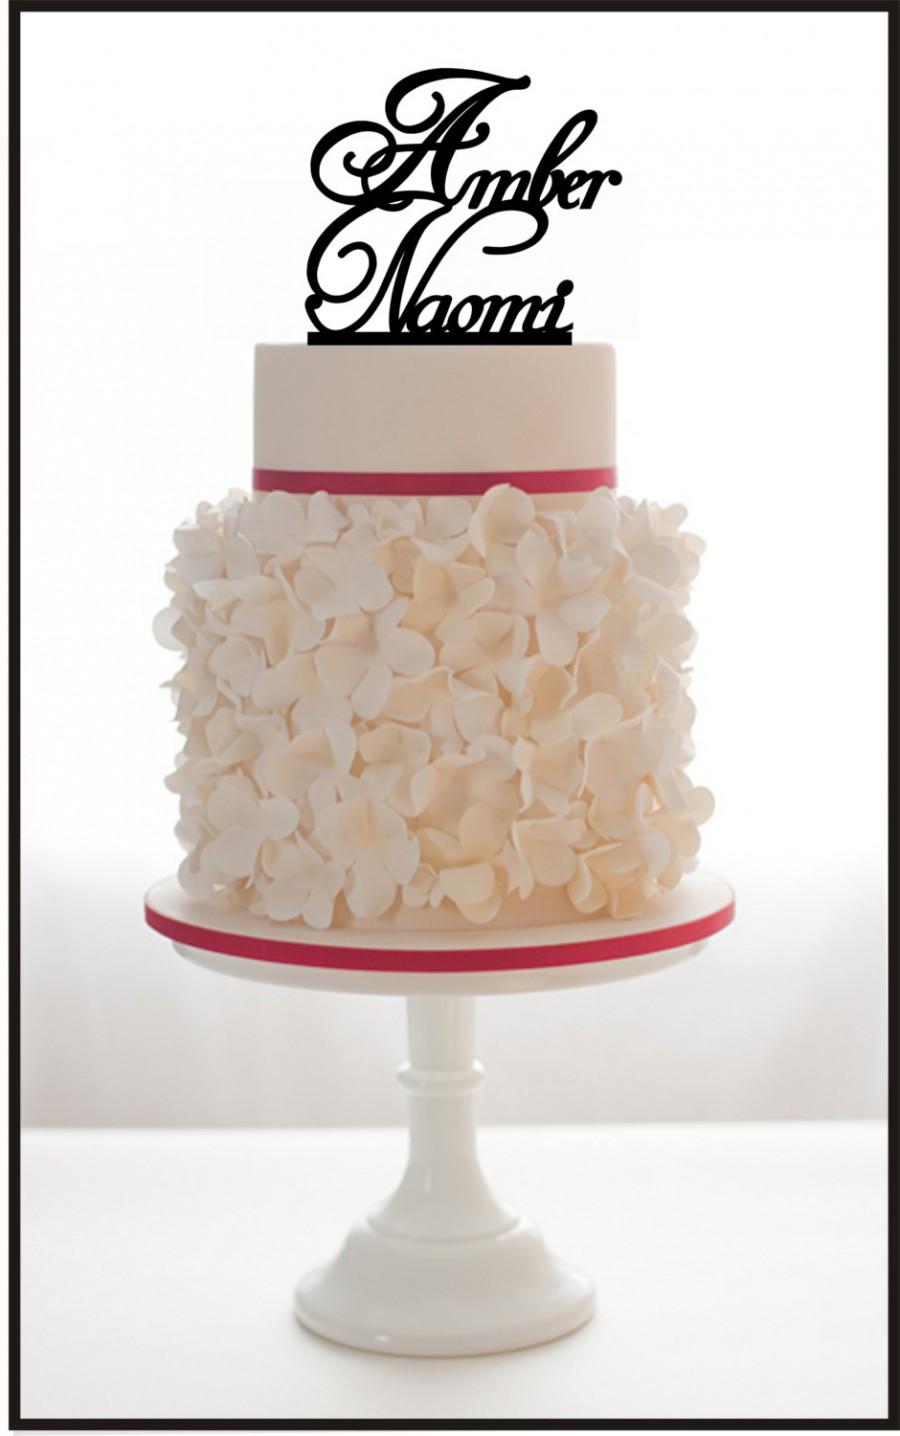 Wedding - Custom Wedding Cake Topper Personalized With Groom and Bride Names, choice of color